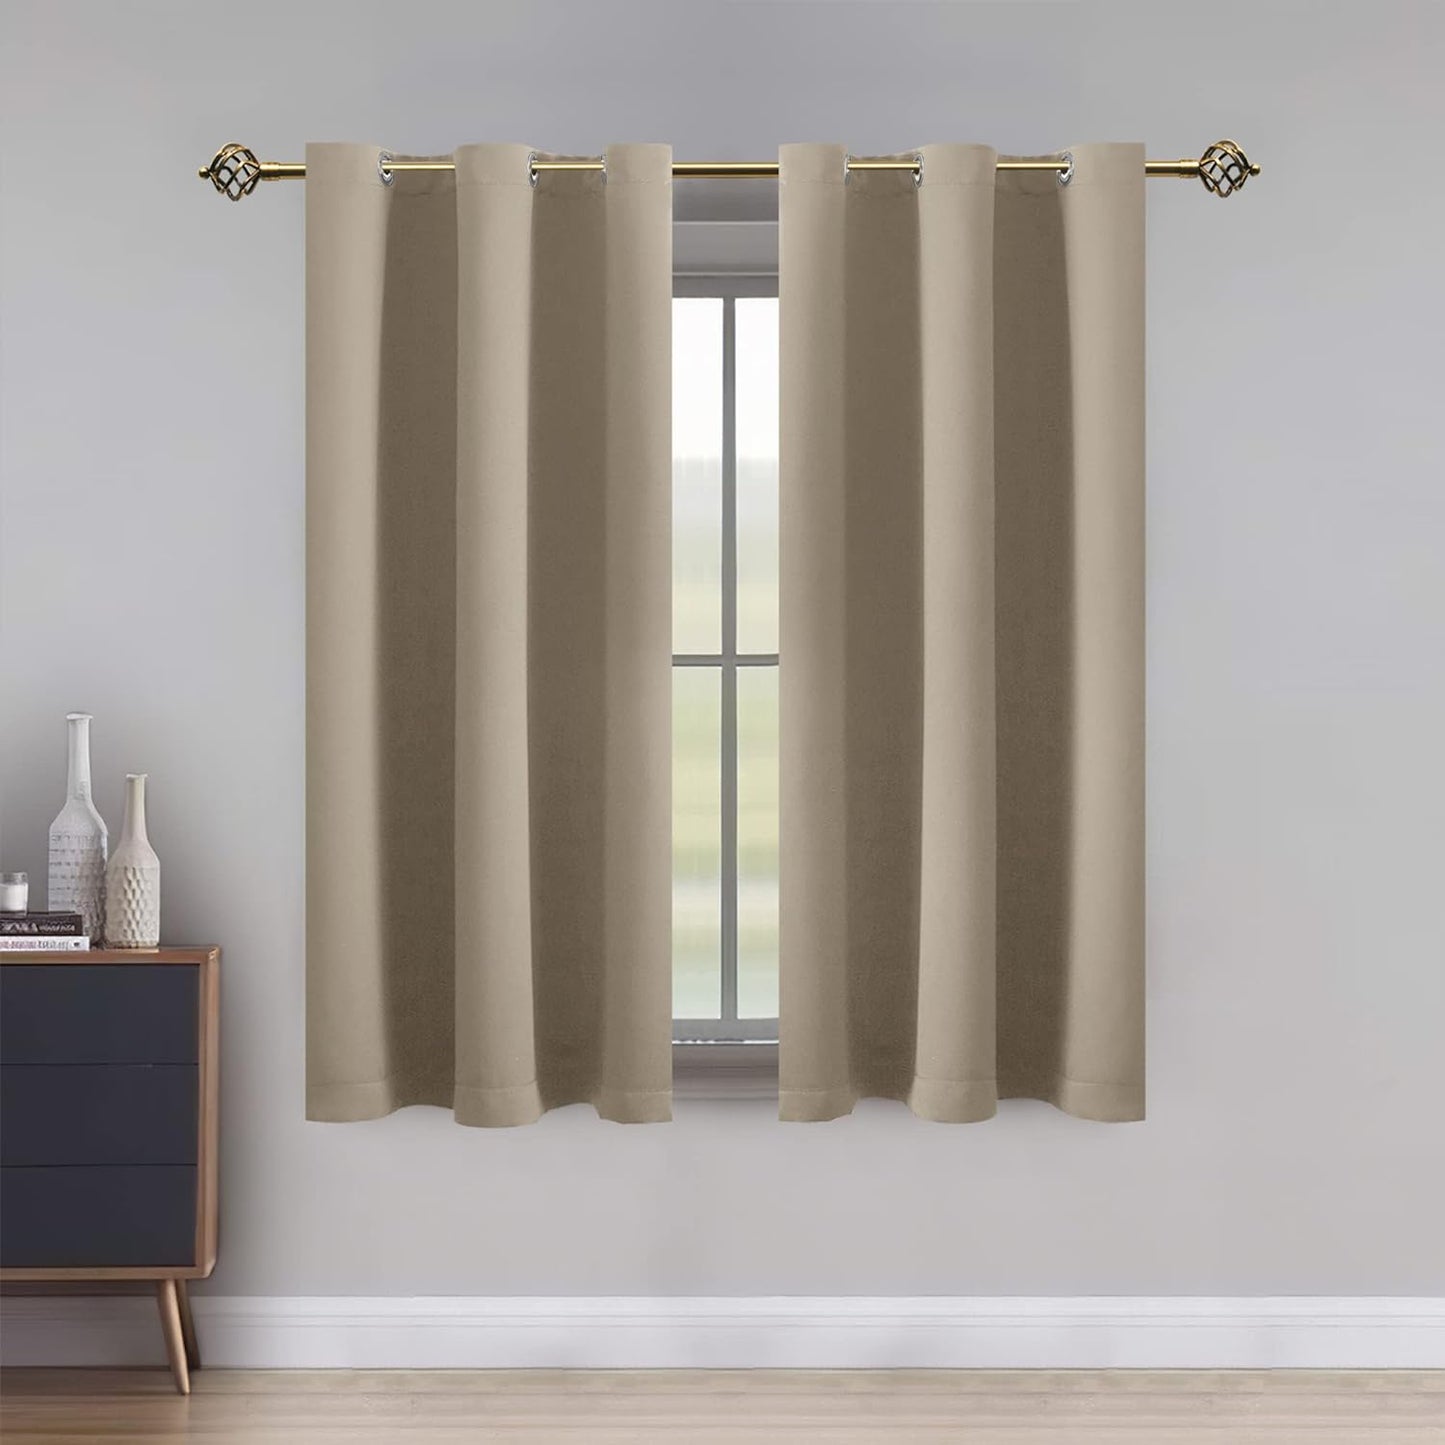 LUSHLEAF Blackout Curtains for Bedroom, Solid Thermal Insulated with Grommet Noise Reduction Window Drapes, Room Darkening Curtains for Living Room, 2 Panels, 52 X 63 Inch Grey  SHEEROOM Light Beige 42 X 45 Inch 